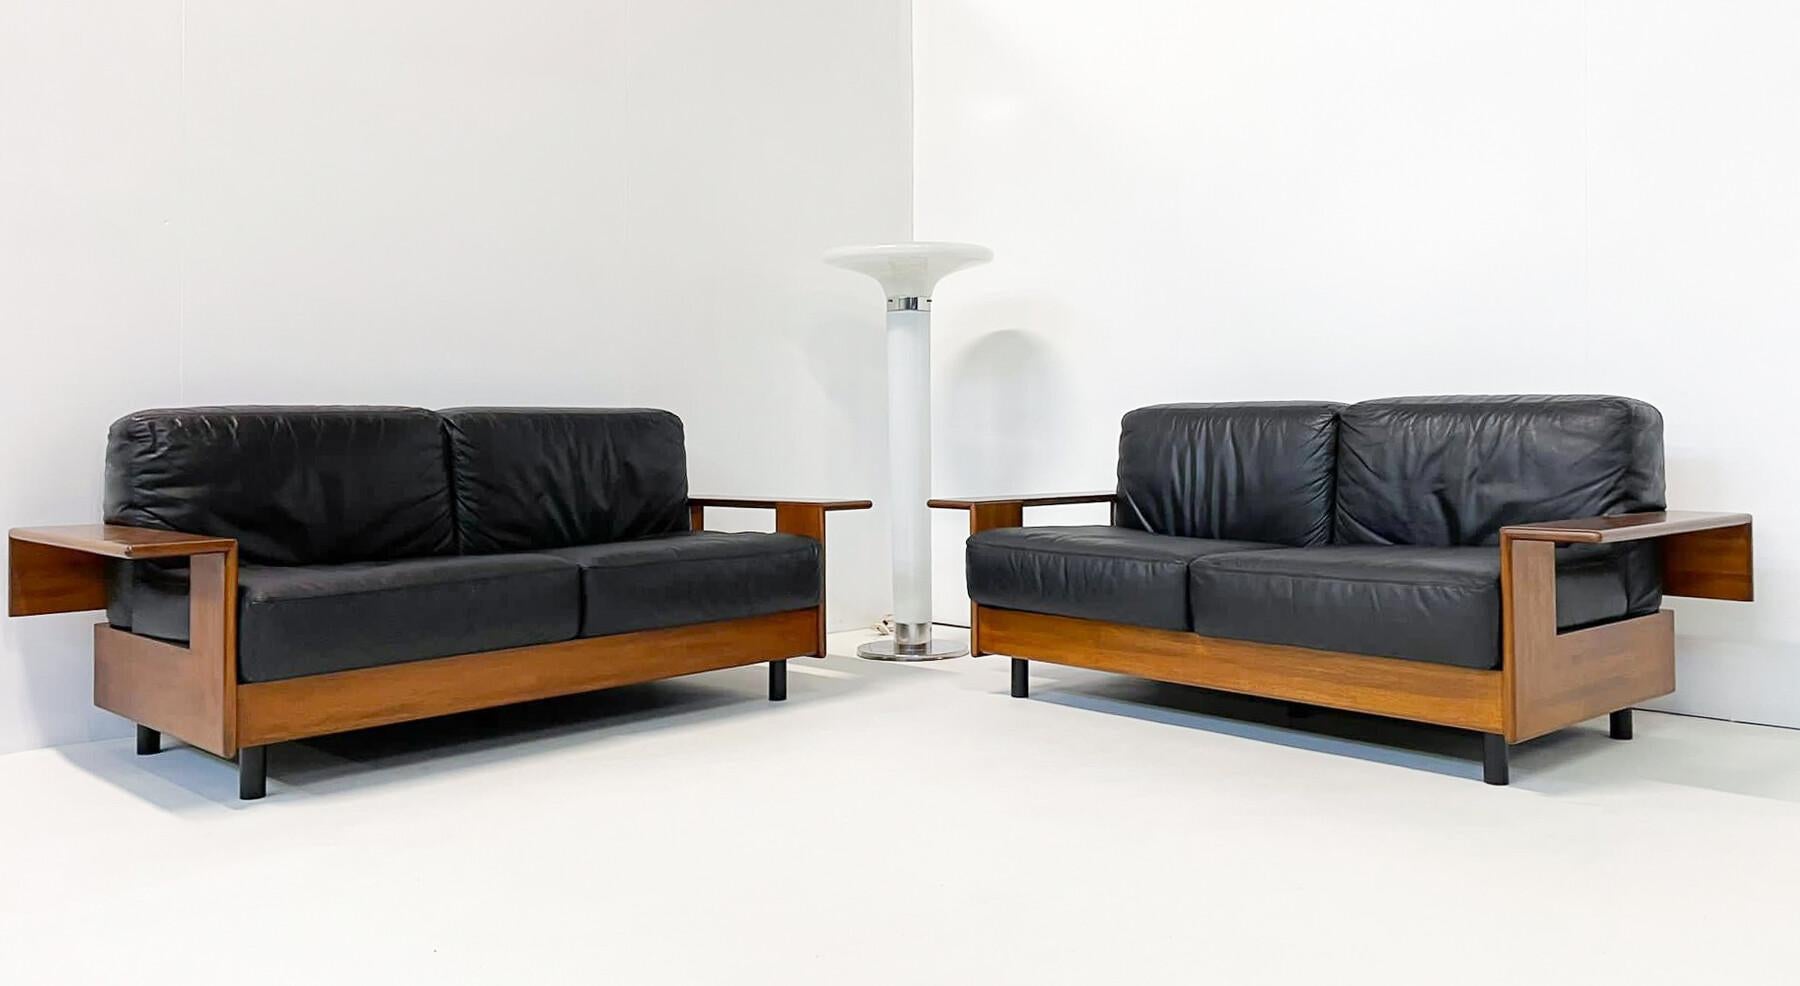 Mid-20th Century Mid-Century Modern Italian Sofa, Black Leather and Wood, 1960s, Two Available For Sale